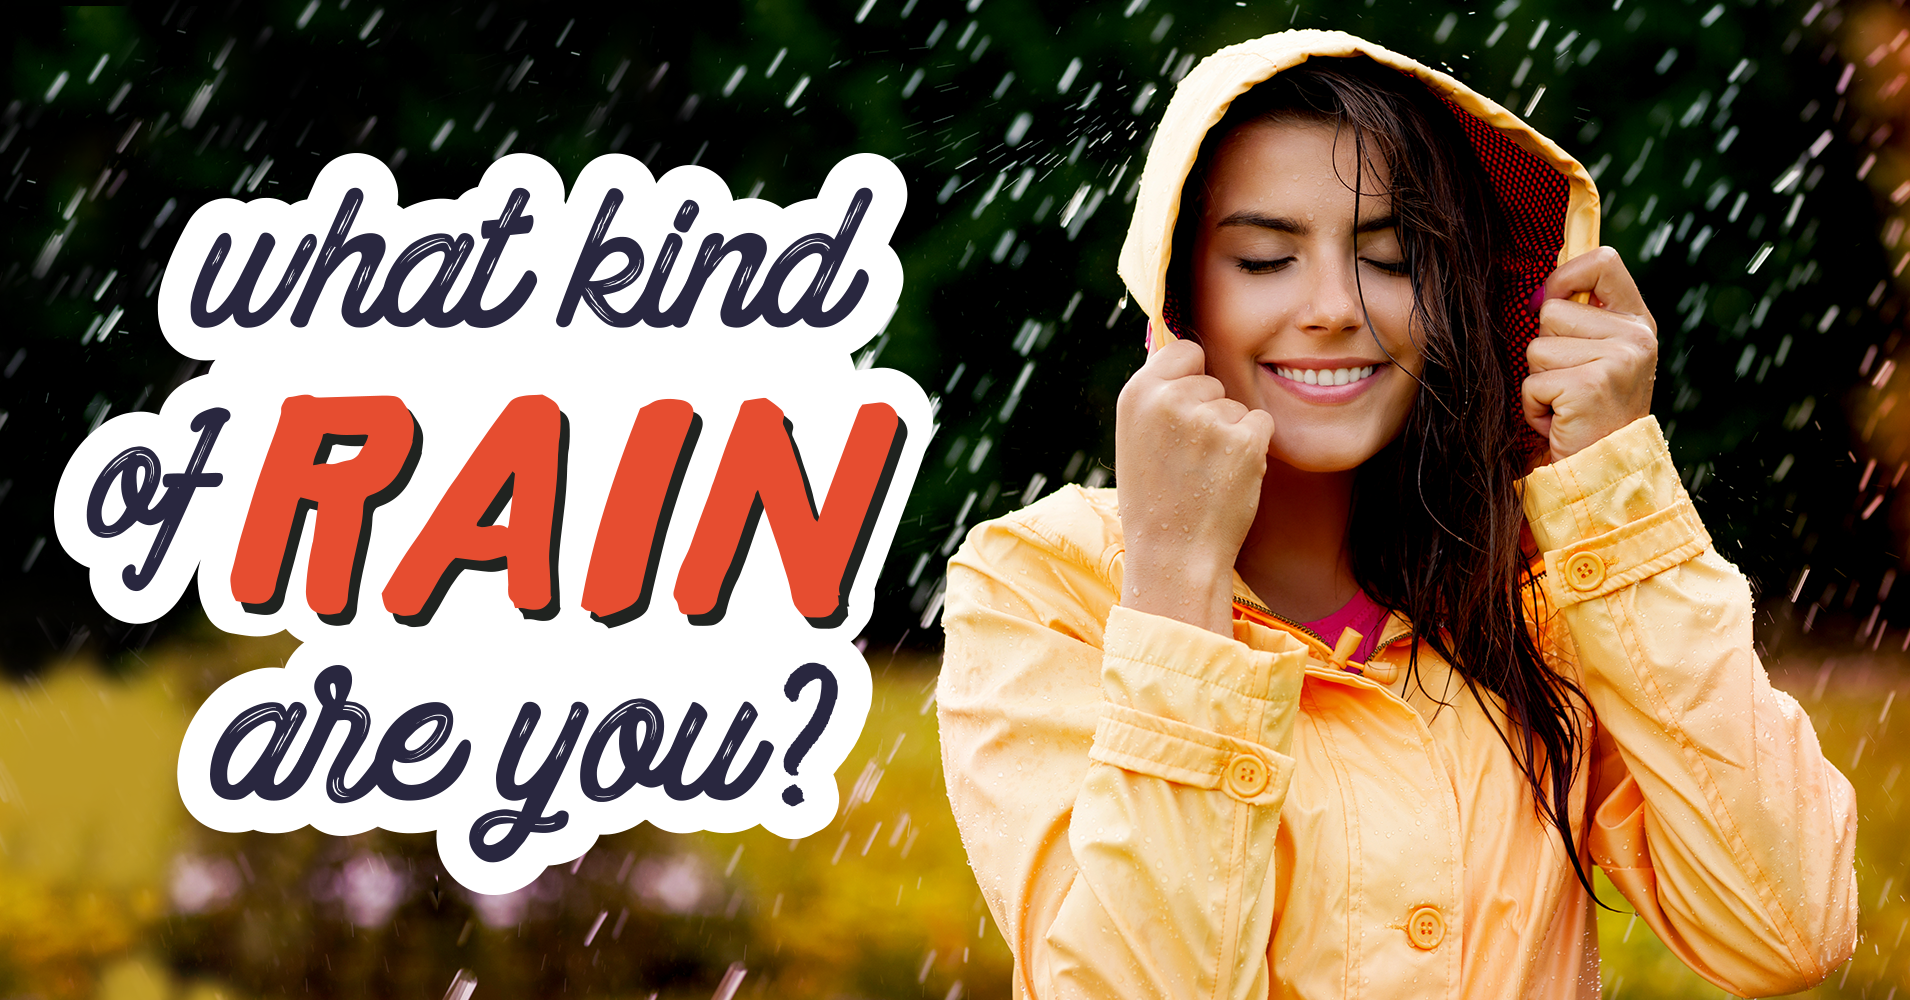 What Kind Of Rain Are You? - Quiz - Quizony.com